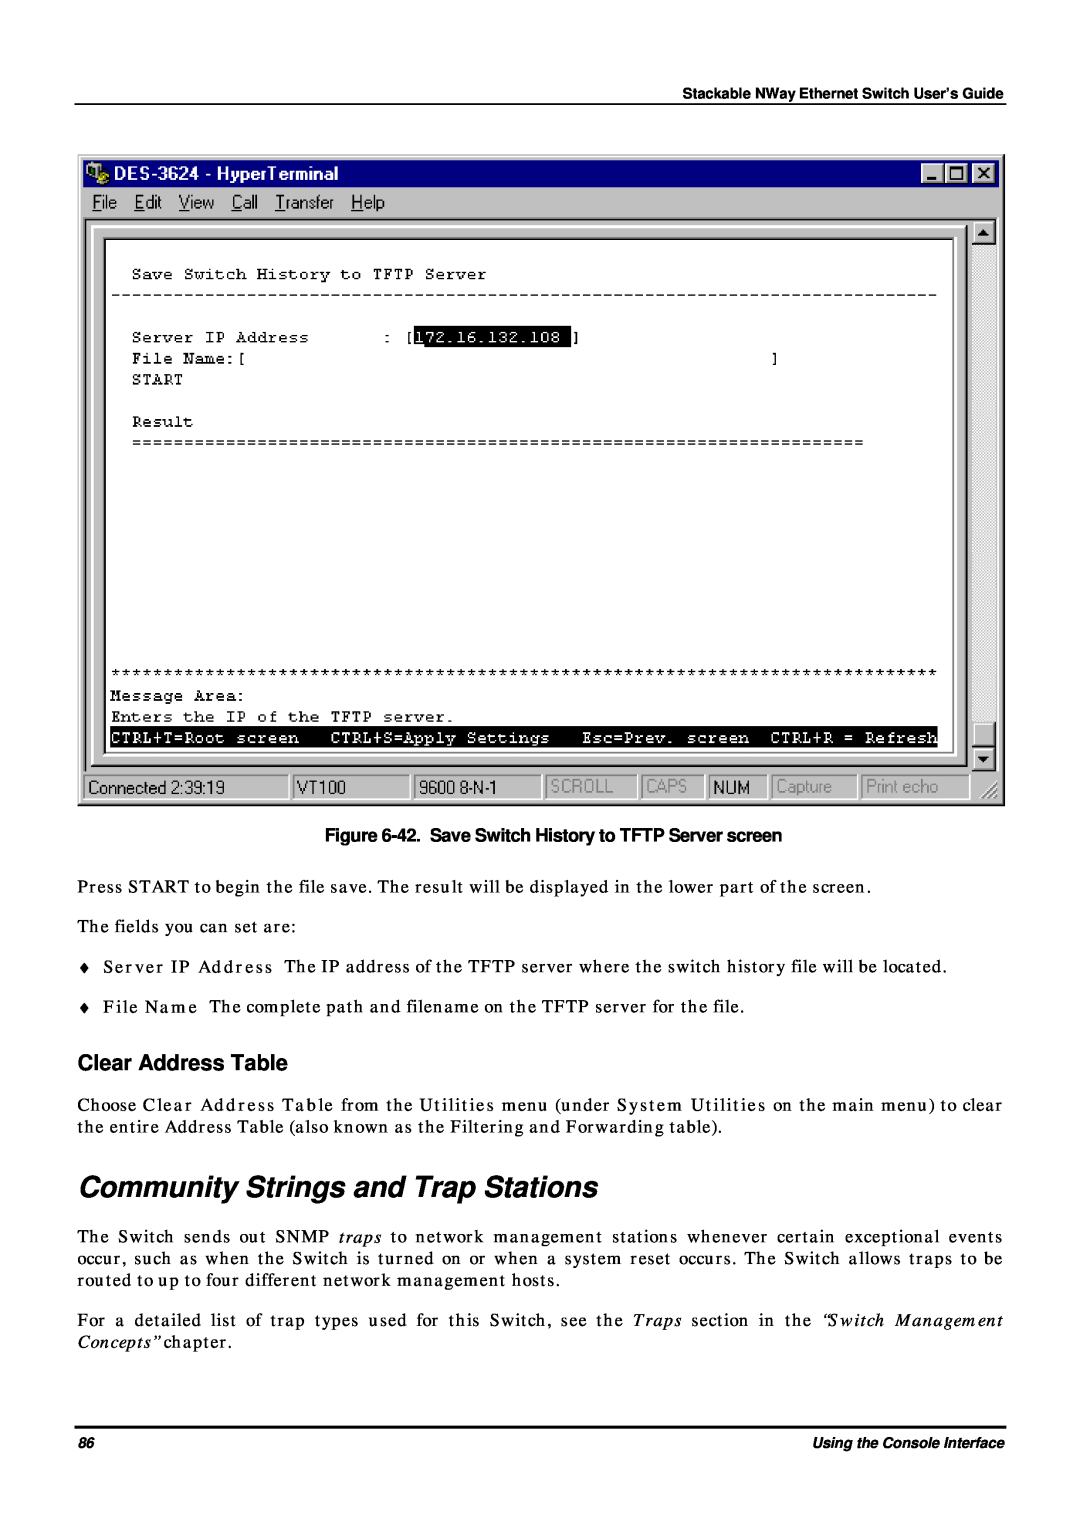 D-Link DES-3624 Community Strings and Trap Stations, Clear Address Table, 42. Save Switch History to TFTP Server screen 